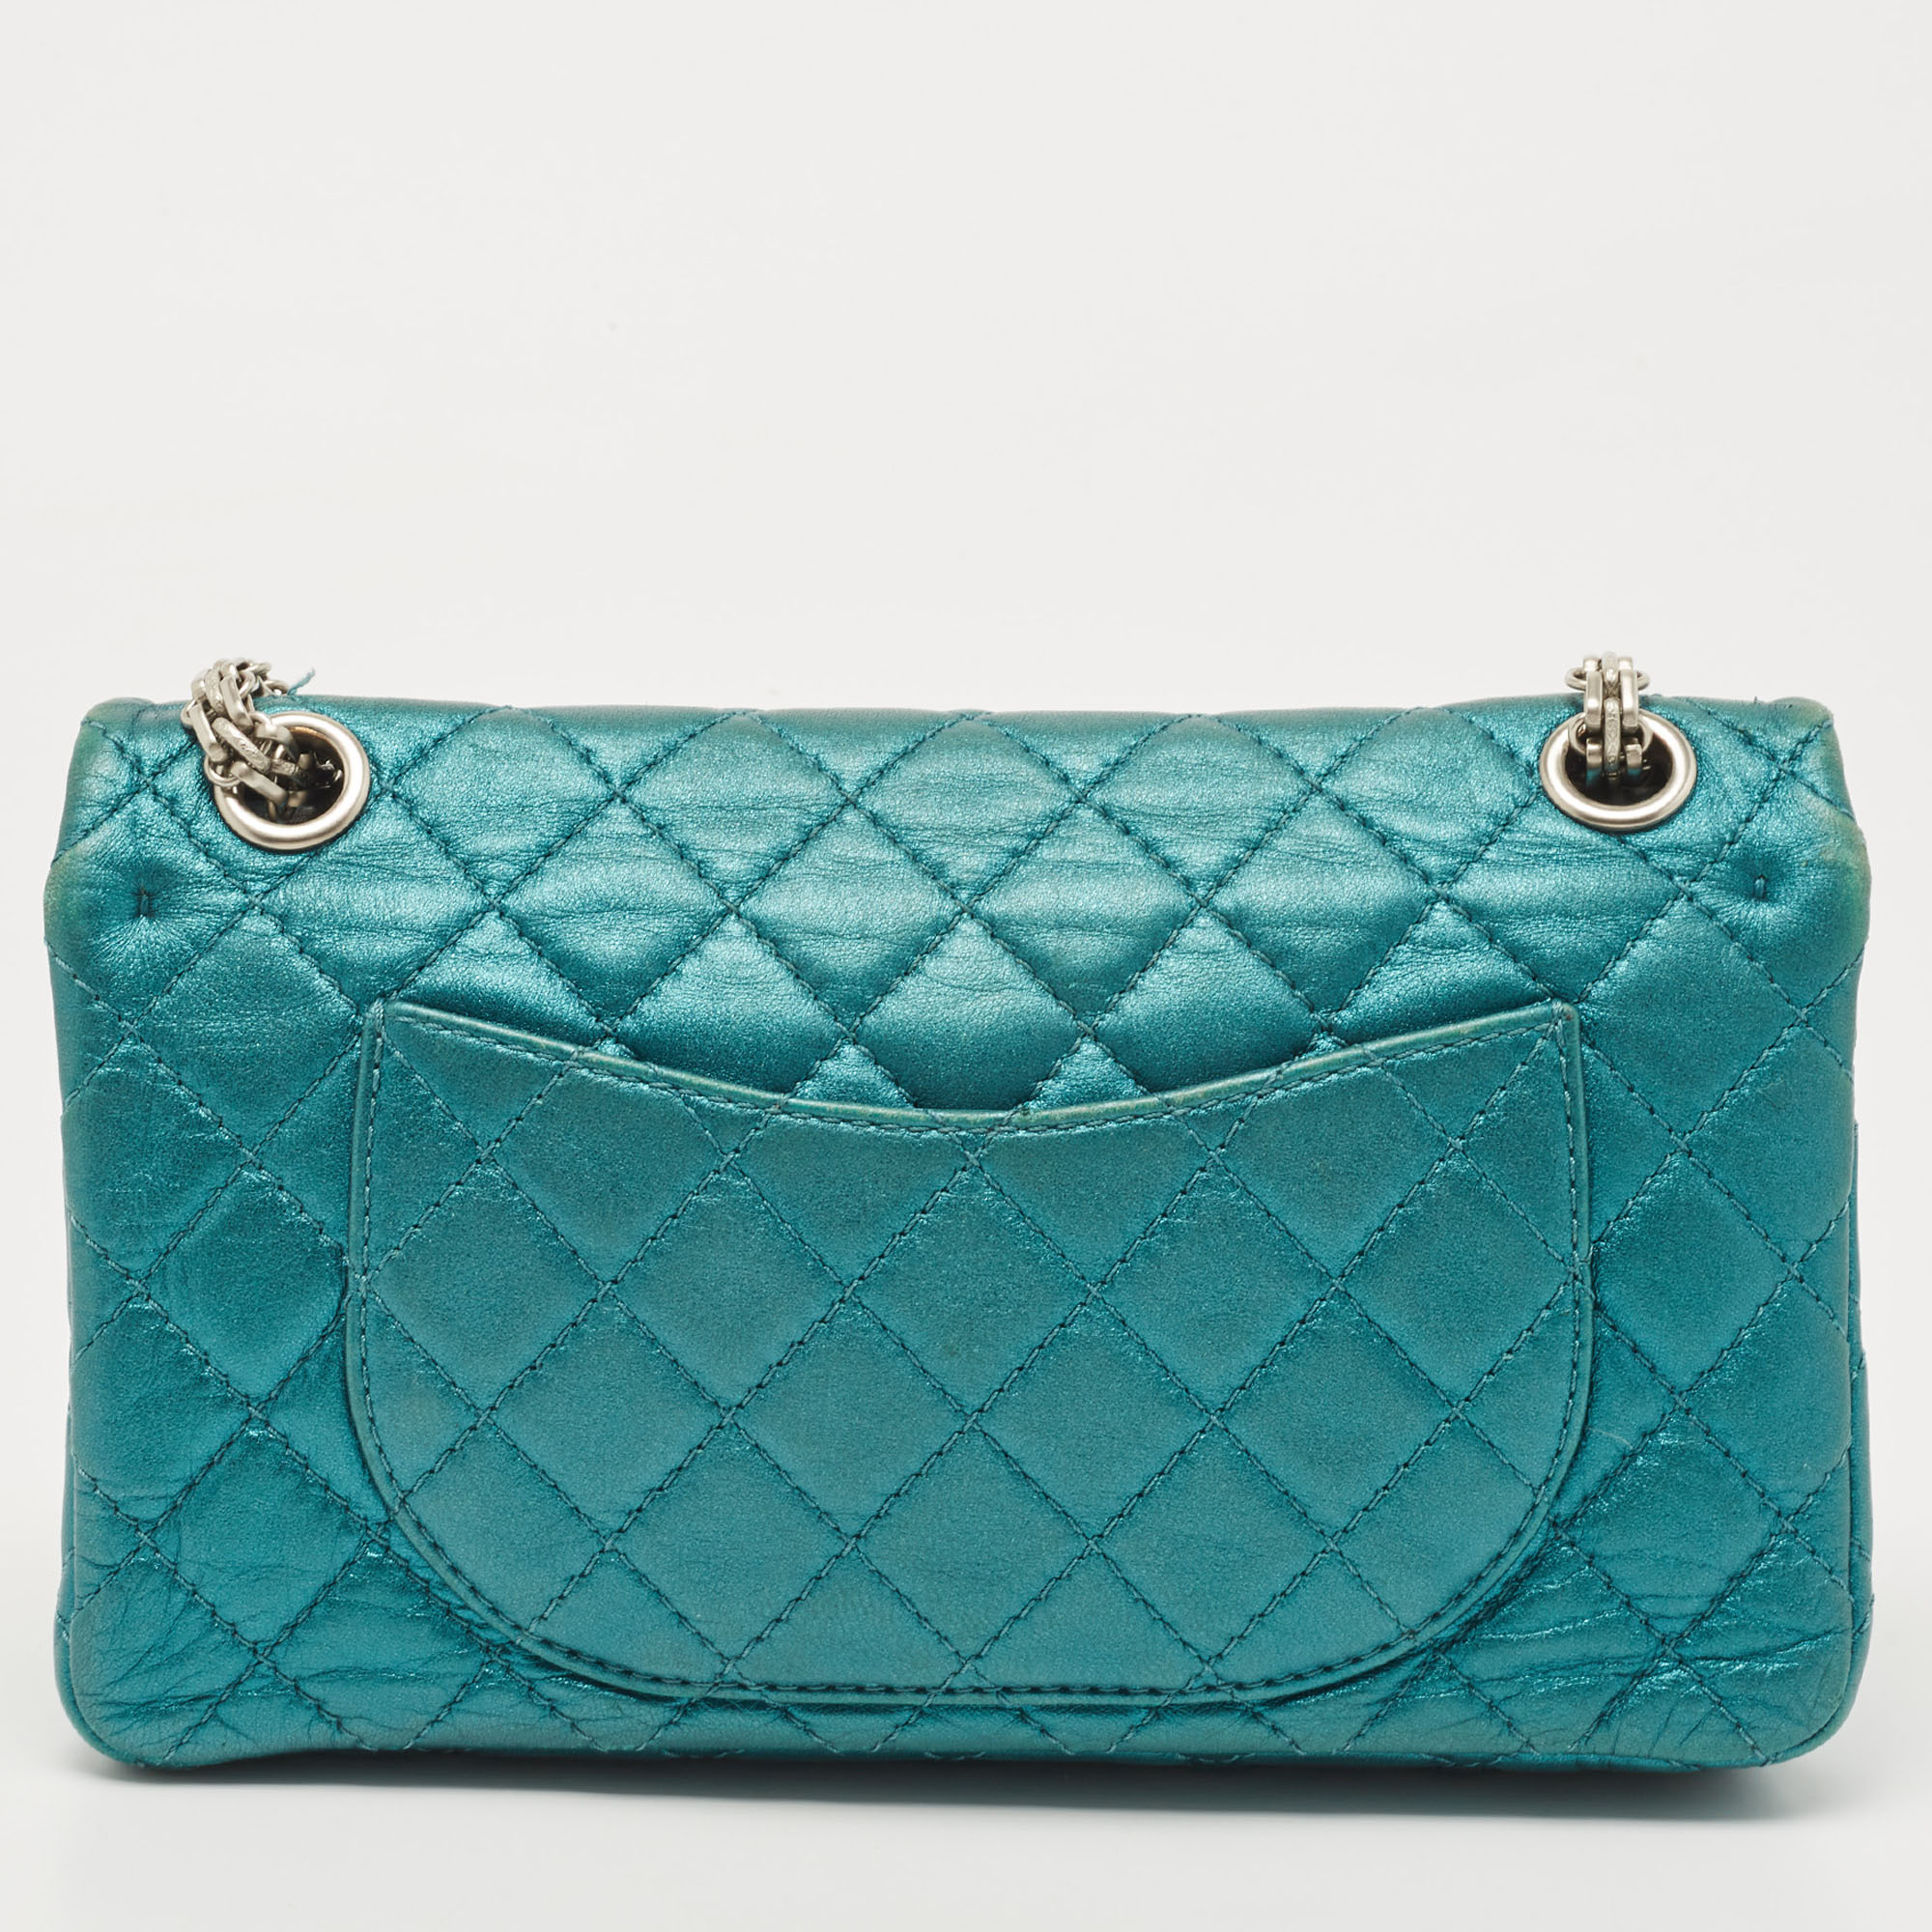 Chanel Teal Quilted Leather Reissue 2.55 Classic 225 Flap Bag